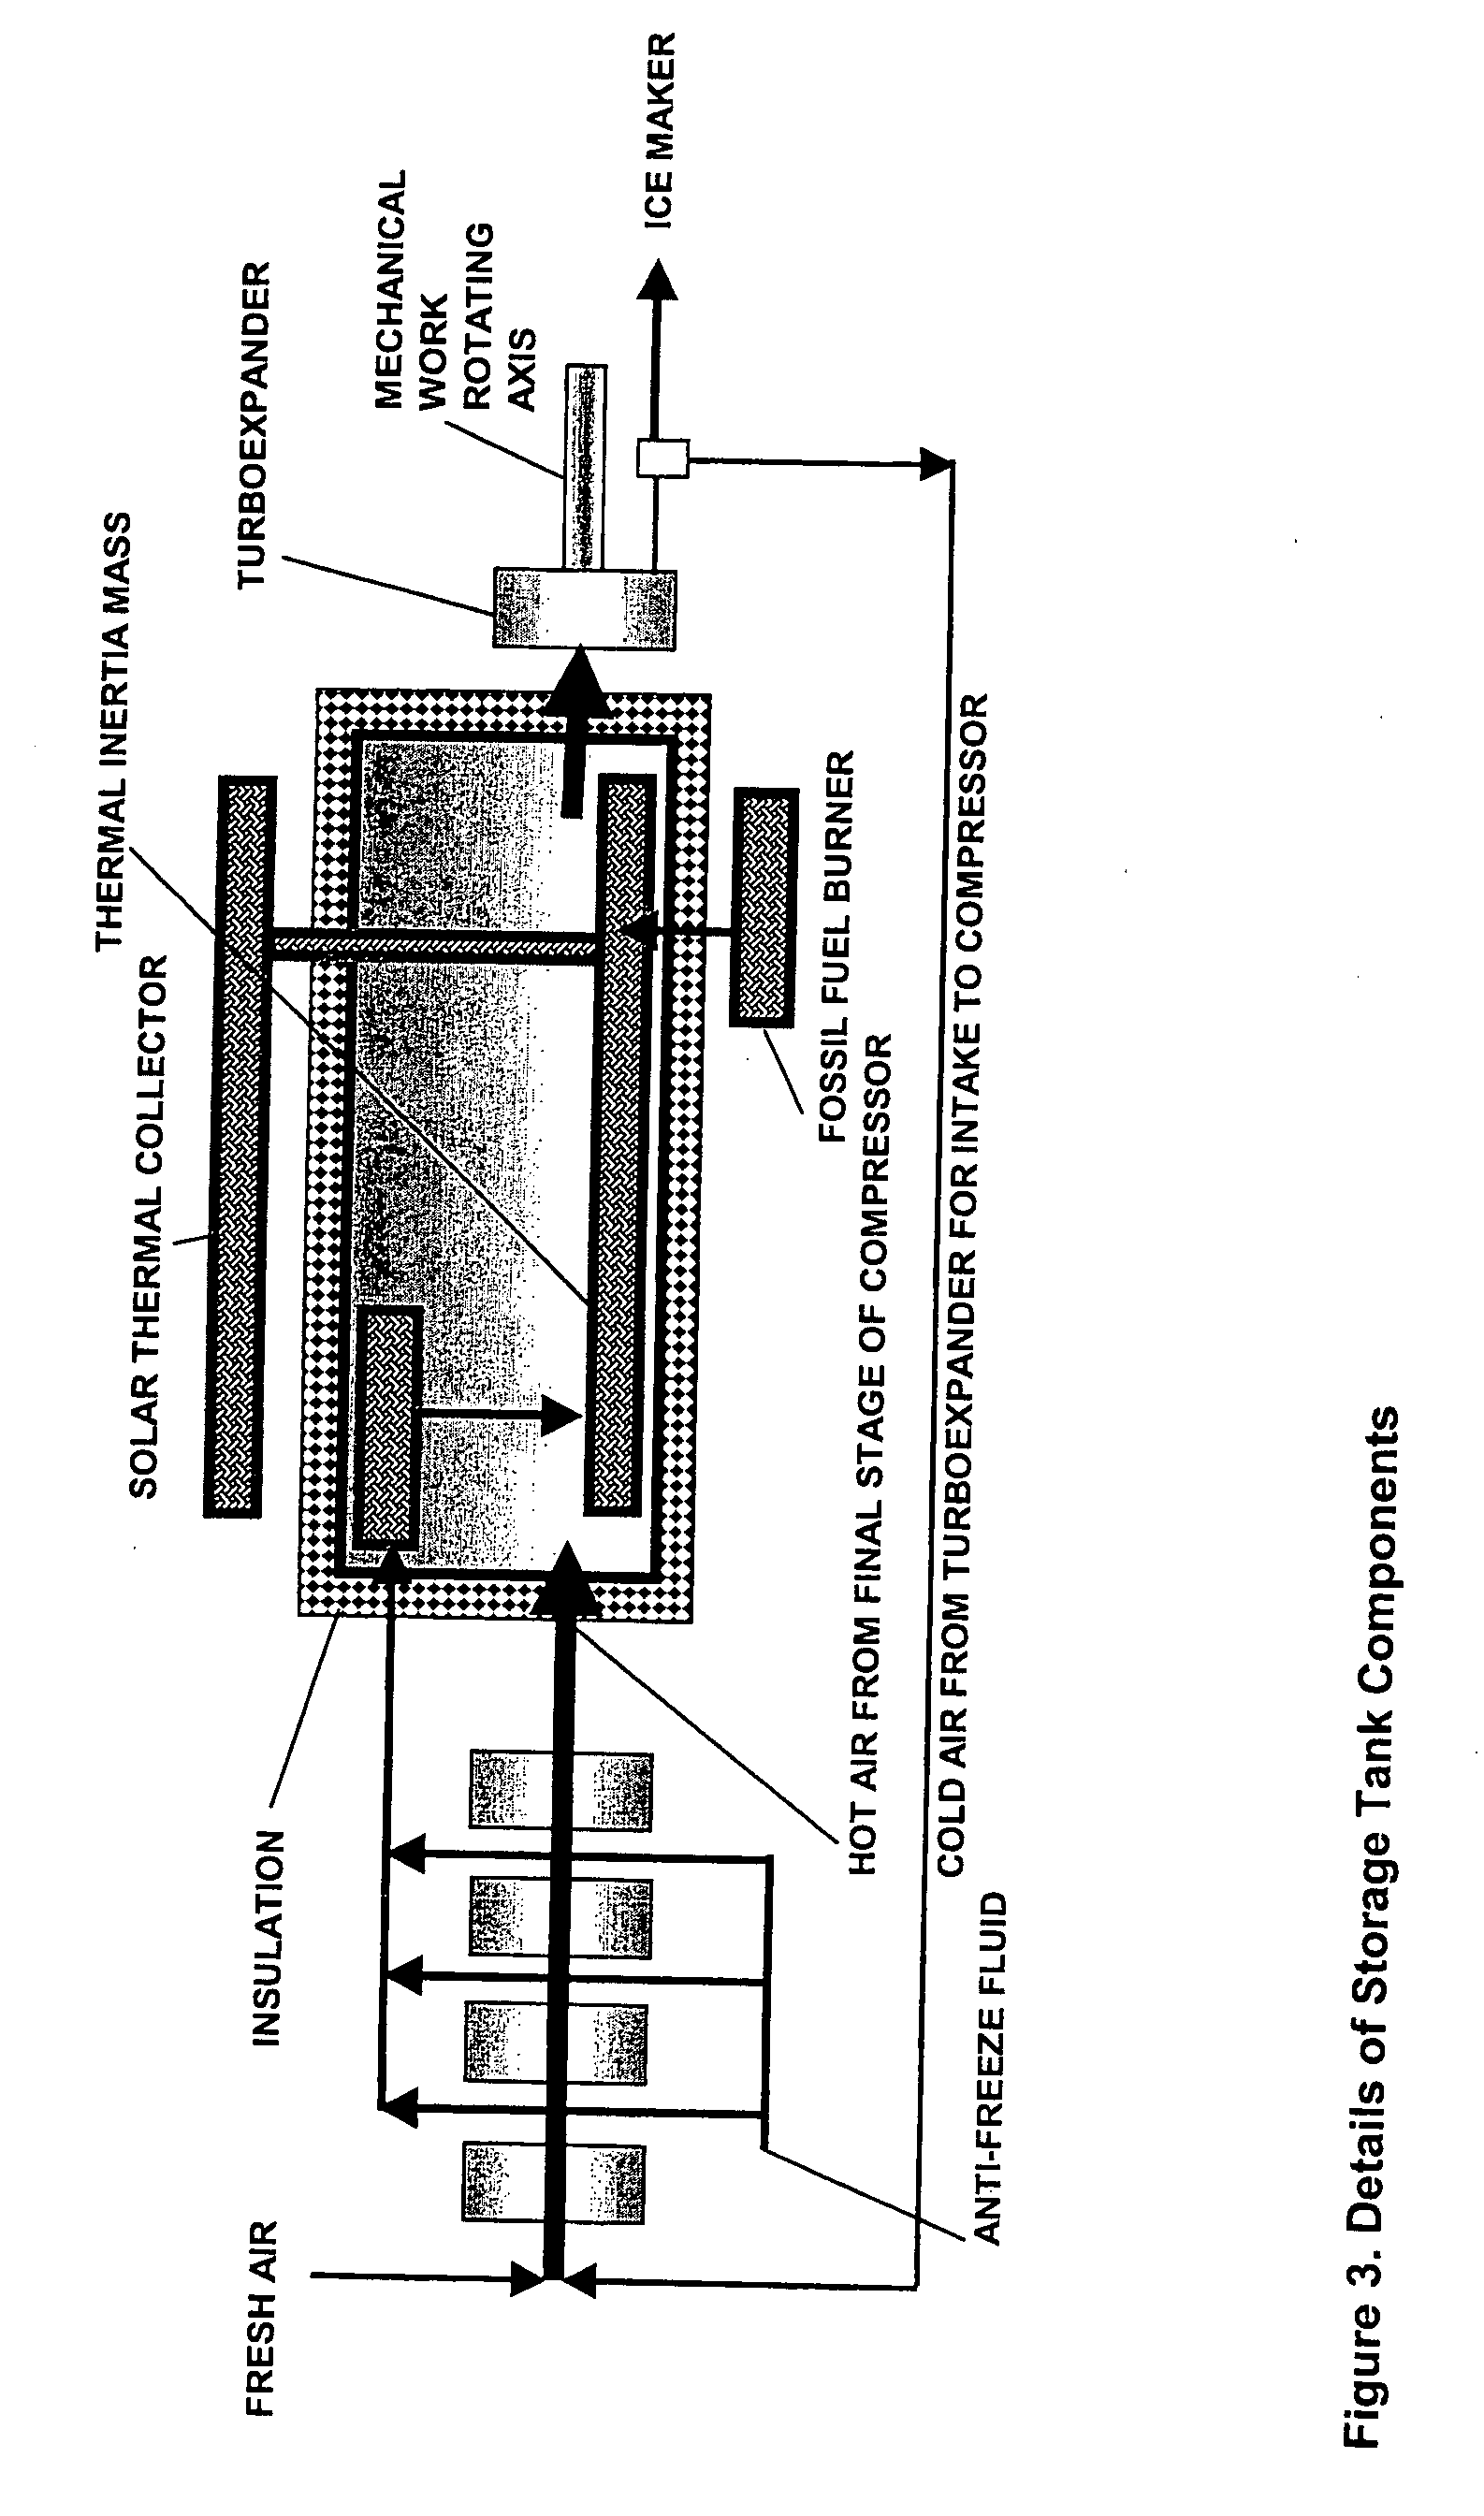 Method and apparatus for using wind turbines to generate and supply uninterrupted power to locations remote from the power grid